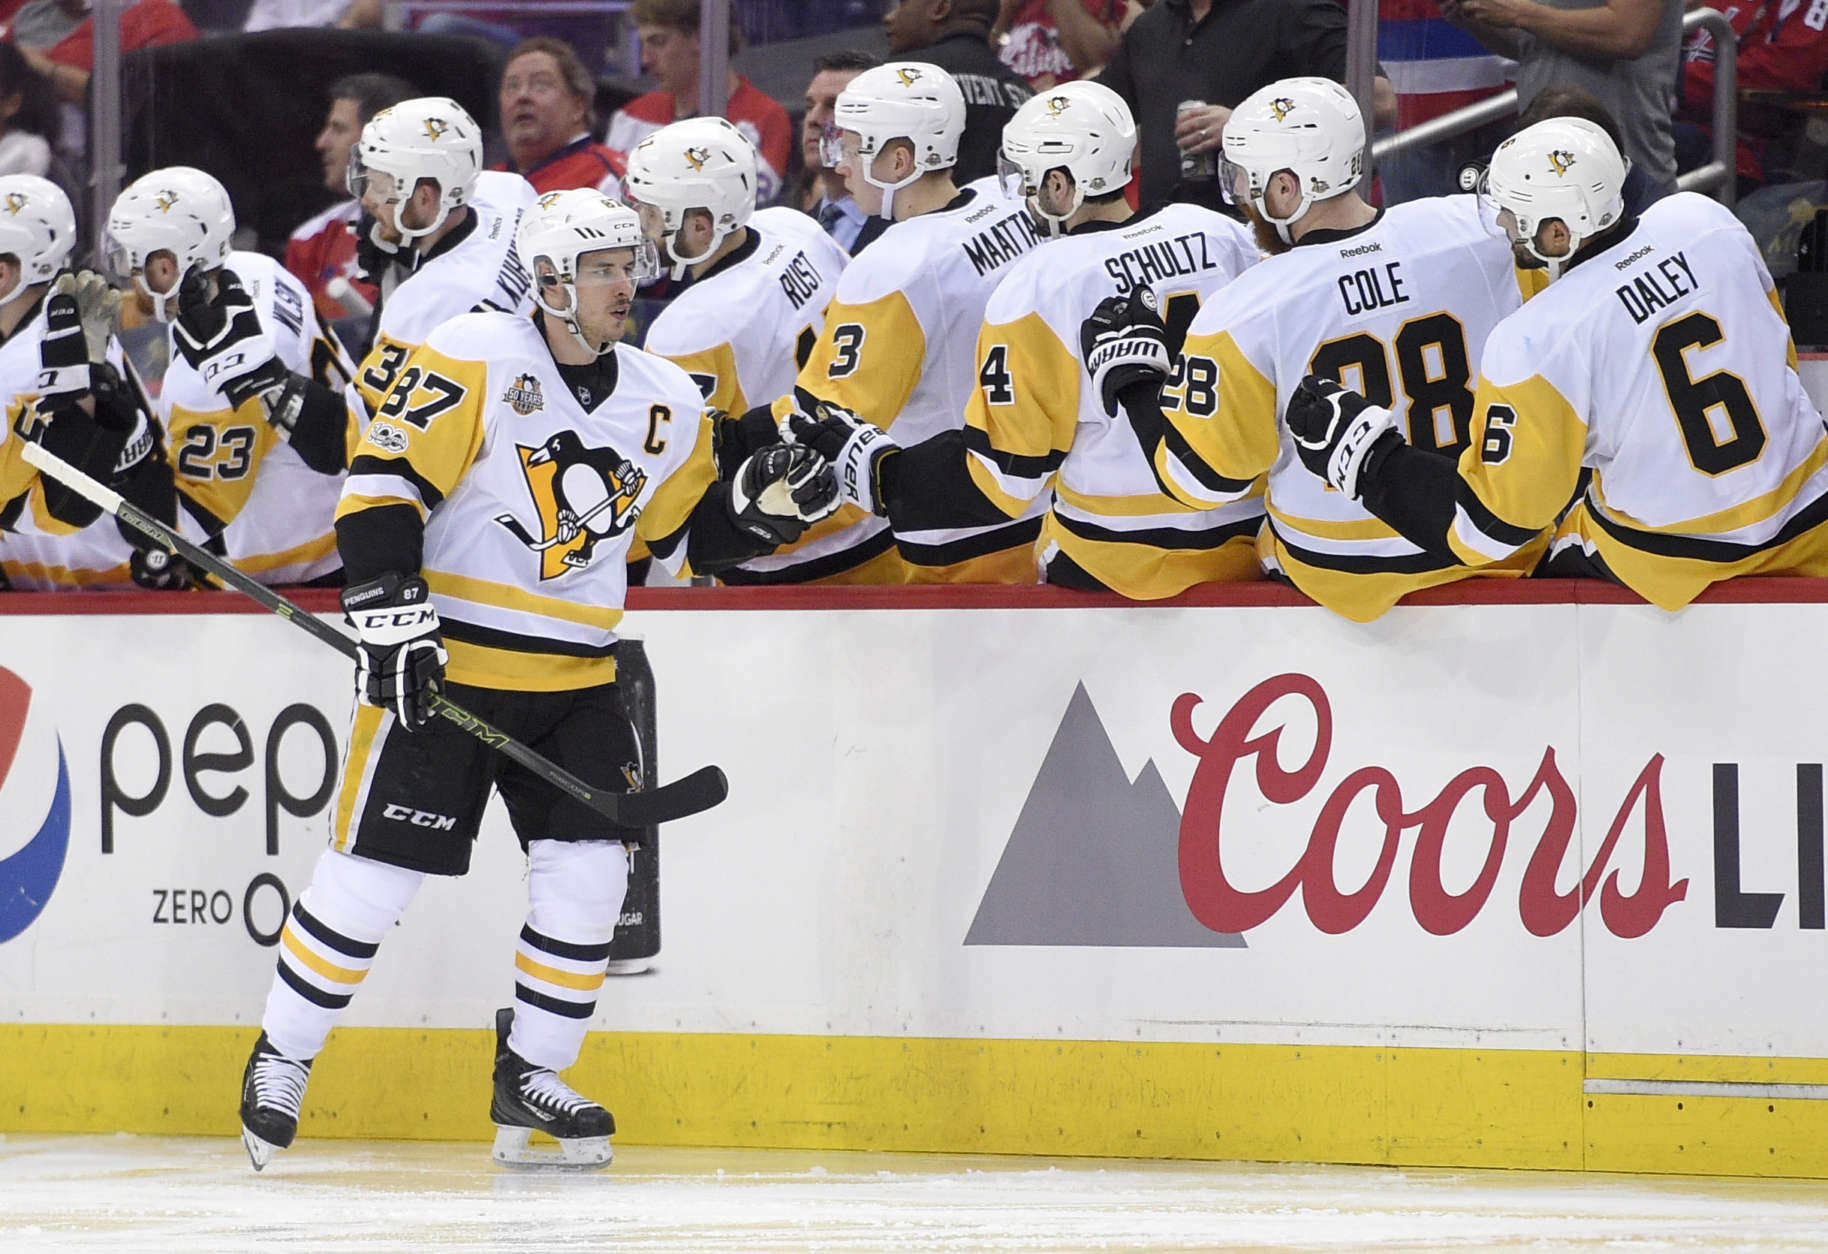 Pittsburgh Penguins center Sidney Crosby (87) celebrates his goal with the bench during the second period of Game 1 of the team's NHL hockey Stanley Cup second-round playoff series against the Washington Capitals, Thursday, April 27, 2017, in Washington. (AP Photo/Nick Wass)